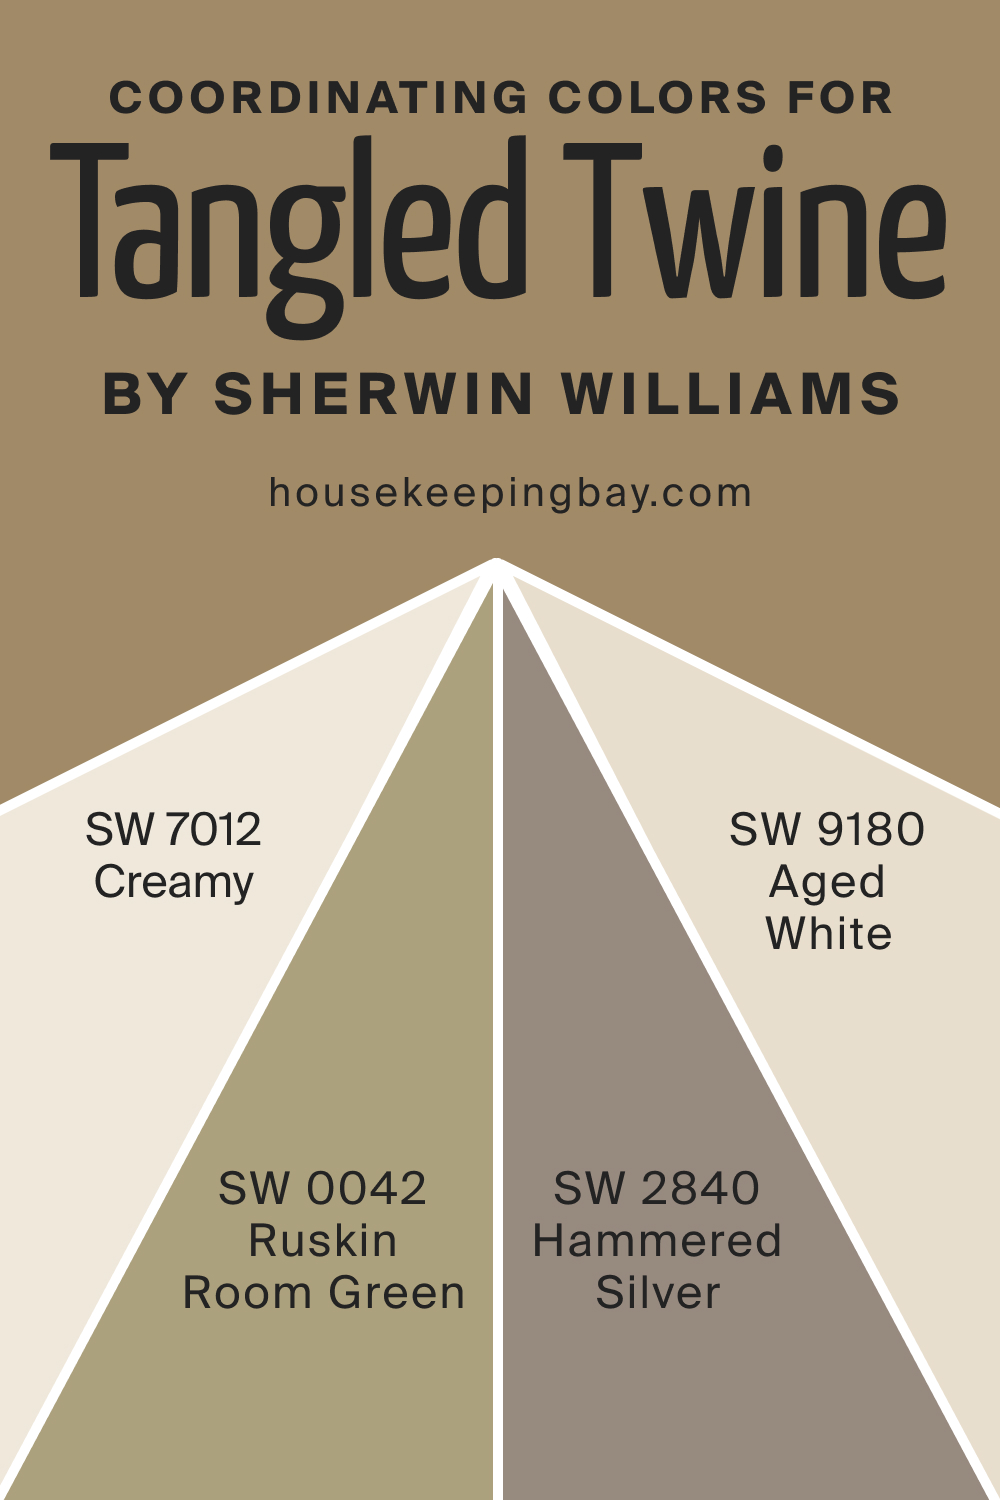 Coordinating Colors for SW 9538 Tangled Twine by Sherwin Williams